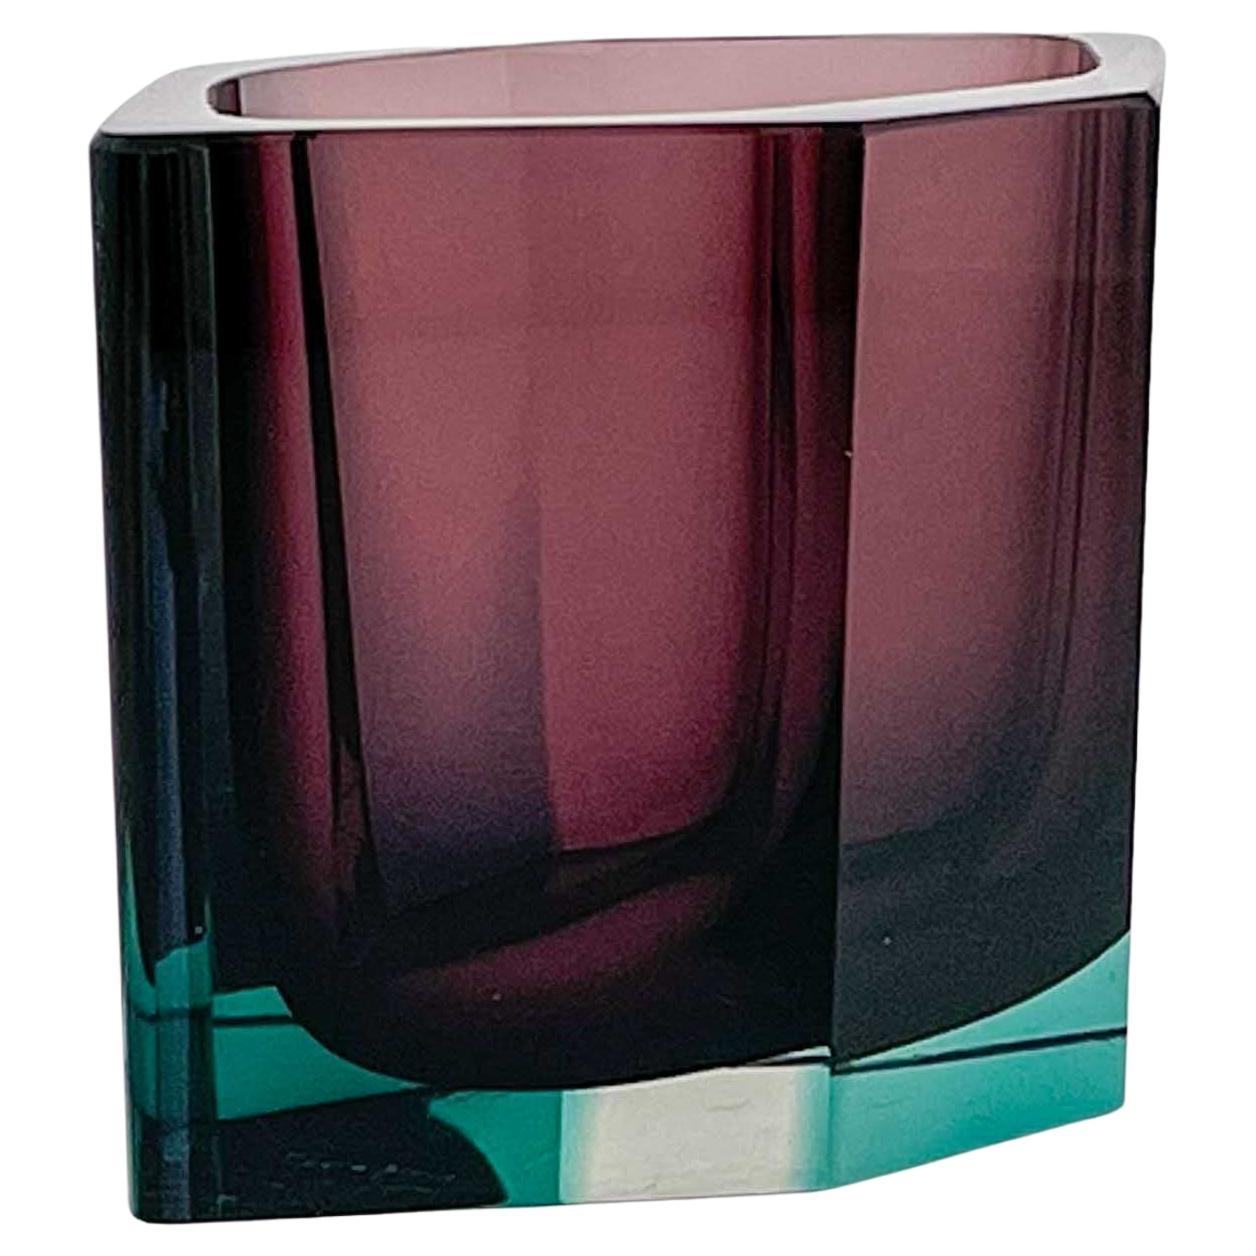 A turned mould blown, cased glass, facet cut art-object “Pilari”, model KF 250, in purple and turquoise hues. Designed by Kaj Franck in 1958 and executed by the Nuutajärvi-Notsjö glassworks, Finland in 1959.

These rare hexagonal shaped vases were